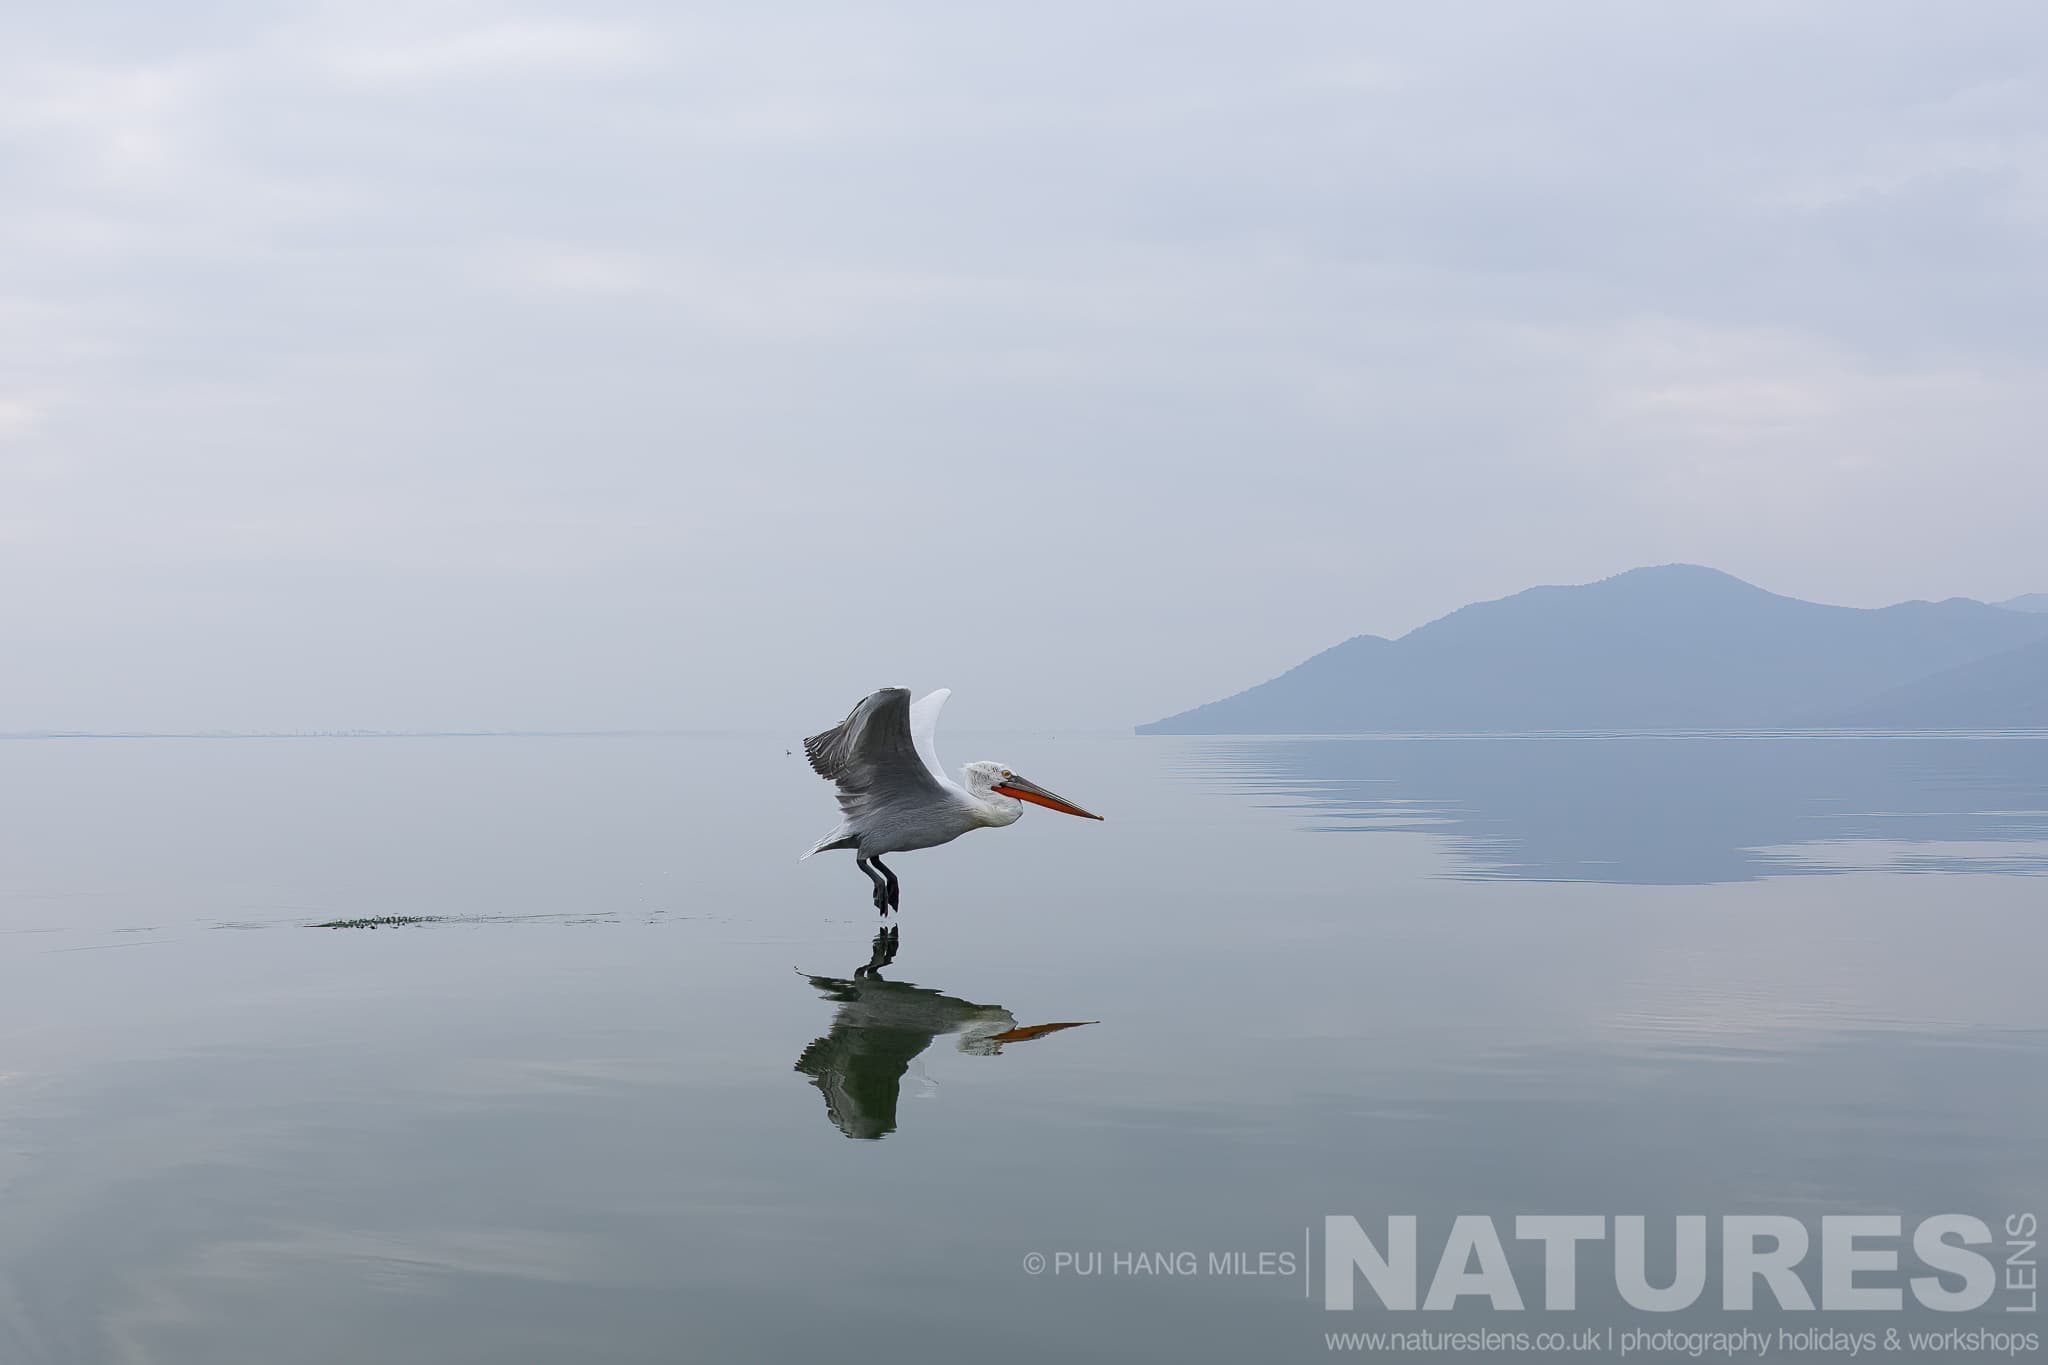 One Of The Pelicans Of Lake Kerkini Flying Over The Waters Of Lake Kerkini With It's Reflection Beneath